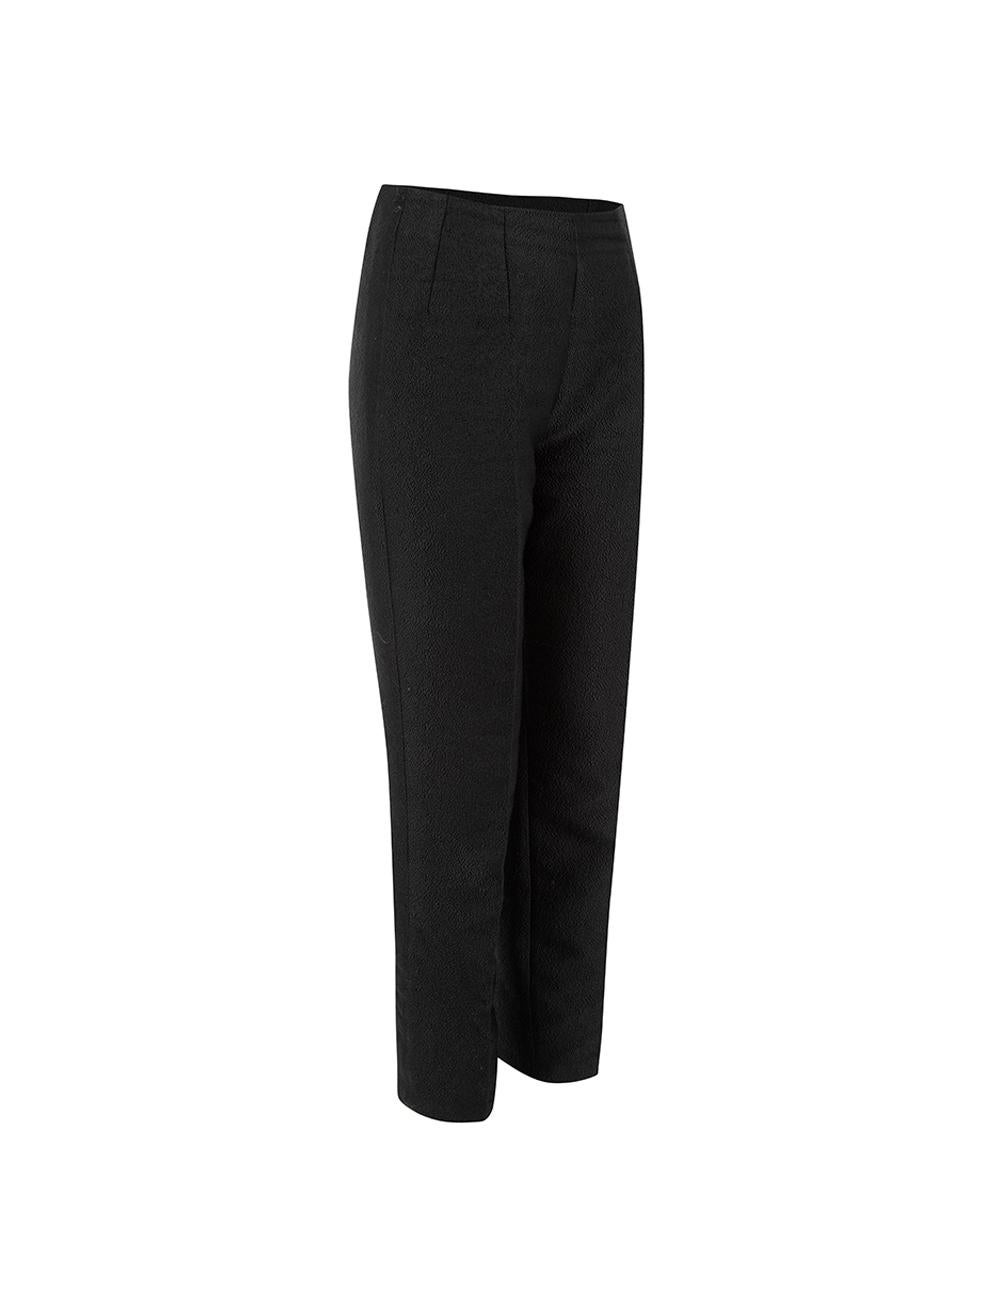 CONDITION is Very good. Minimal wear to trousers is evident. Minimal wear and pilling to the oute fabric on this used Emilia Wickstead designer resale item.   Details  Black Synthetic Straight leg trousers Mid rise Textured Back zip closure  